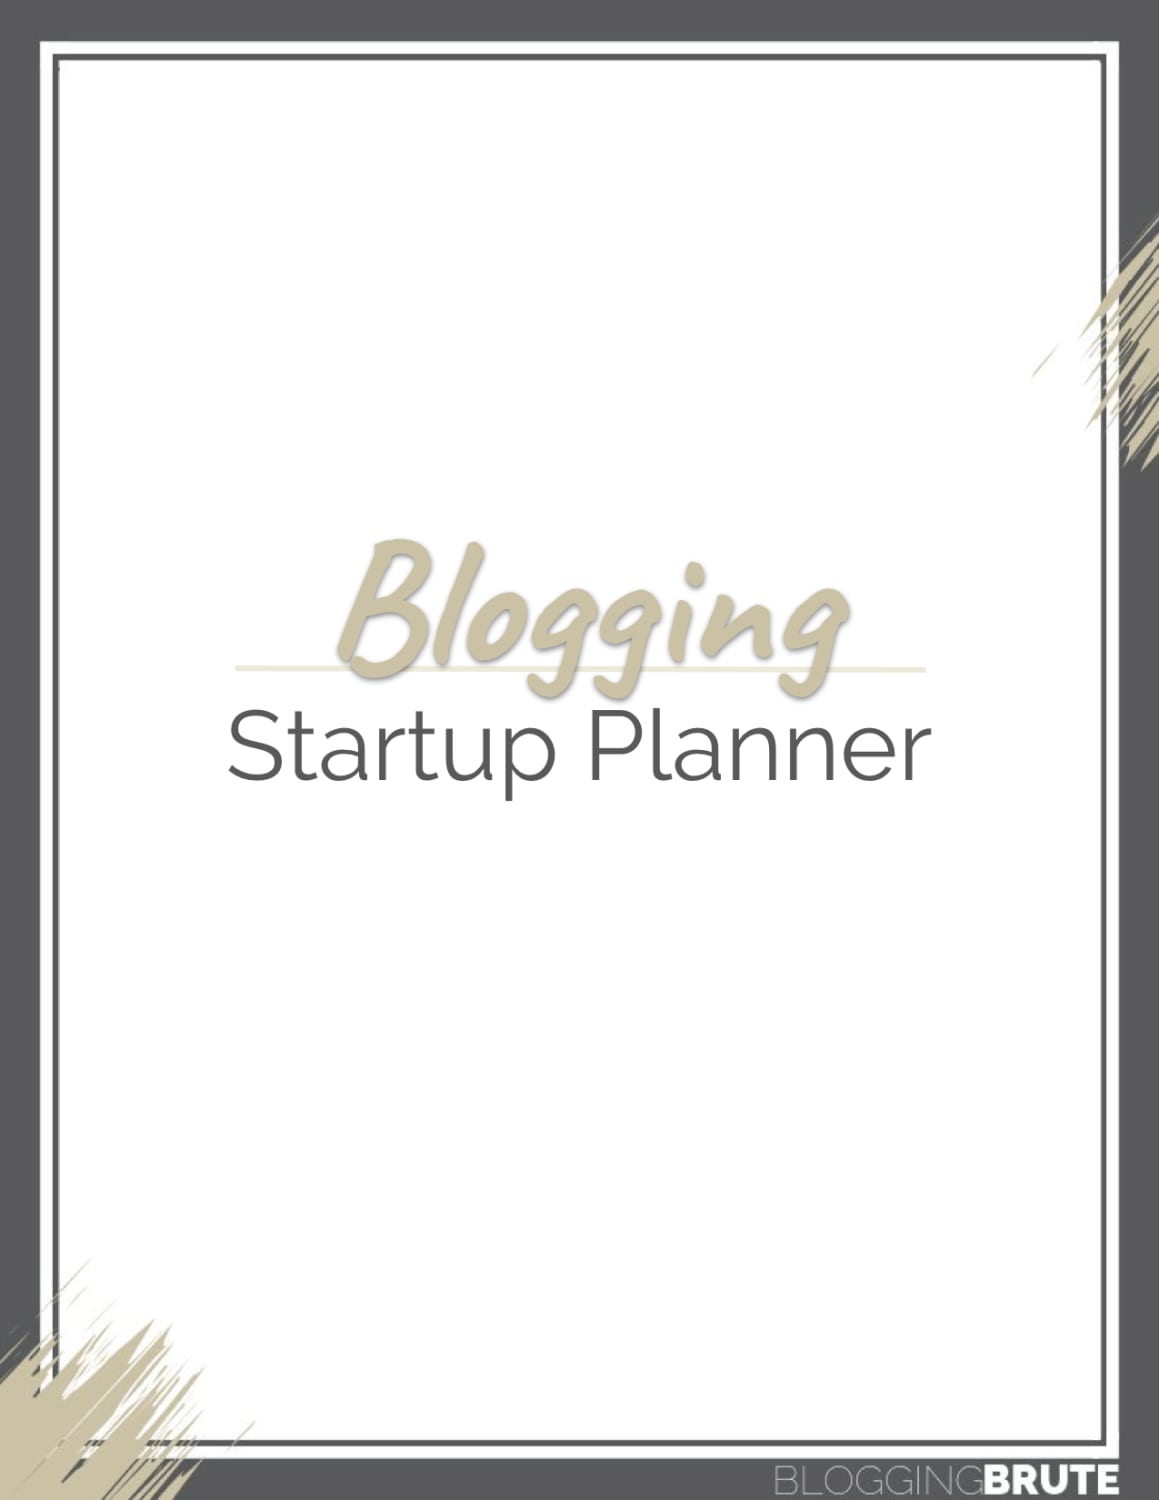 Blogging Startup Planner for New Bloggers - from the Blogging Brute